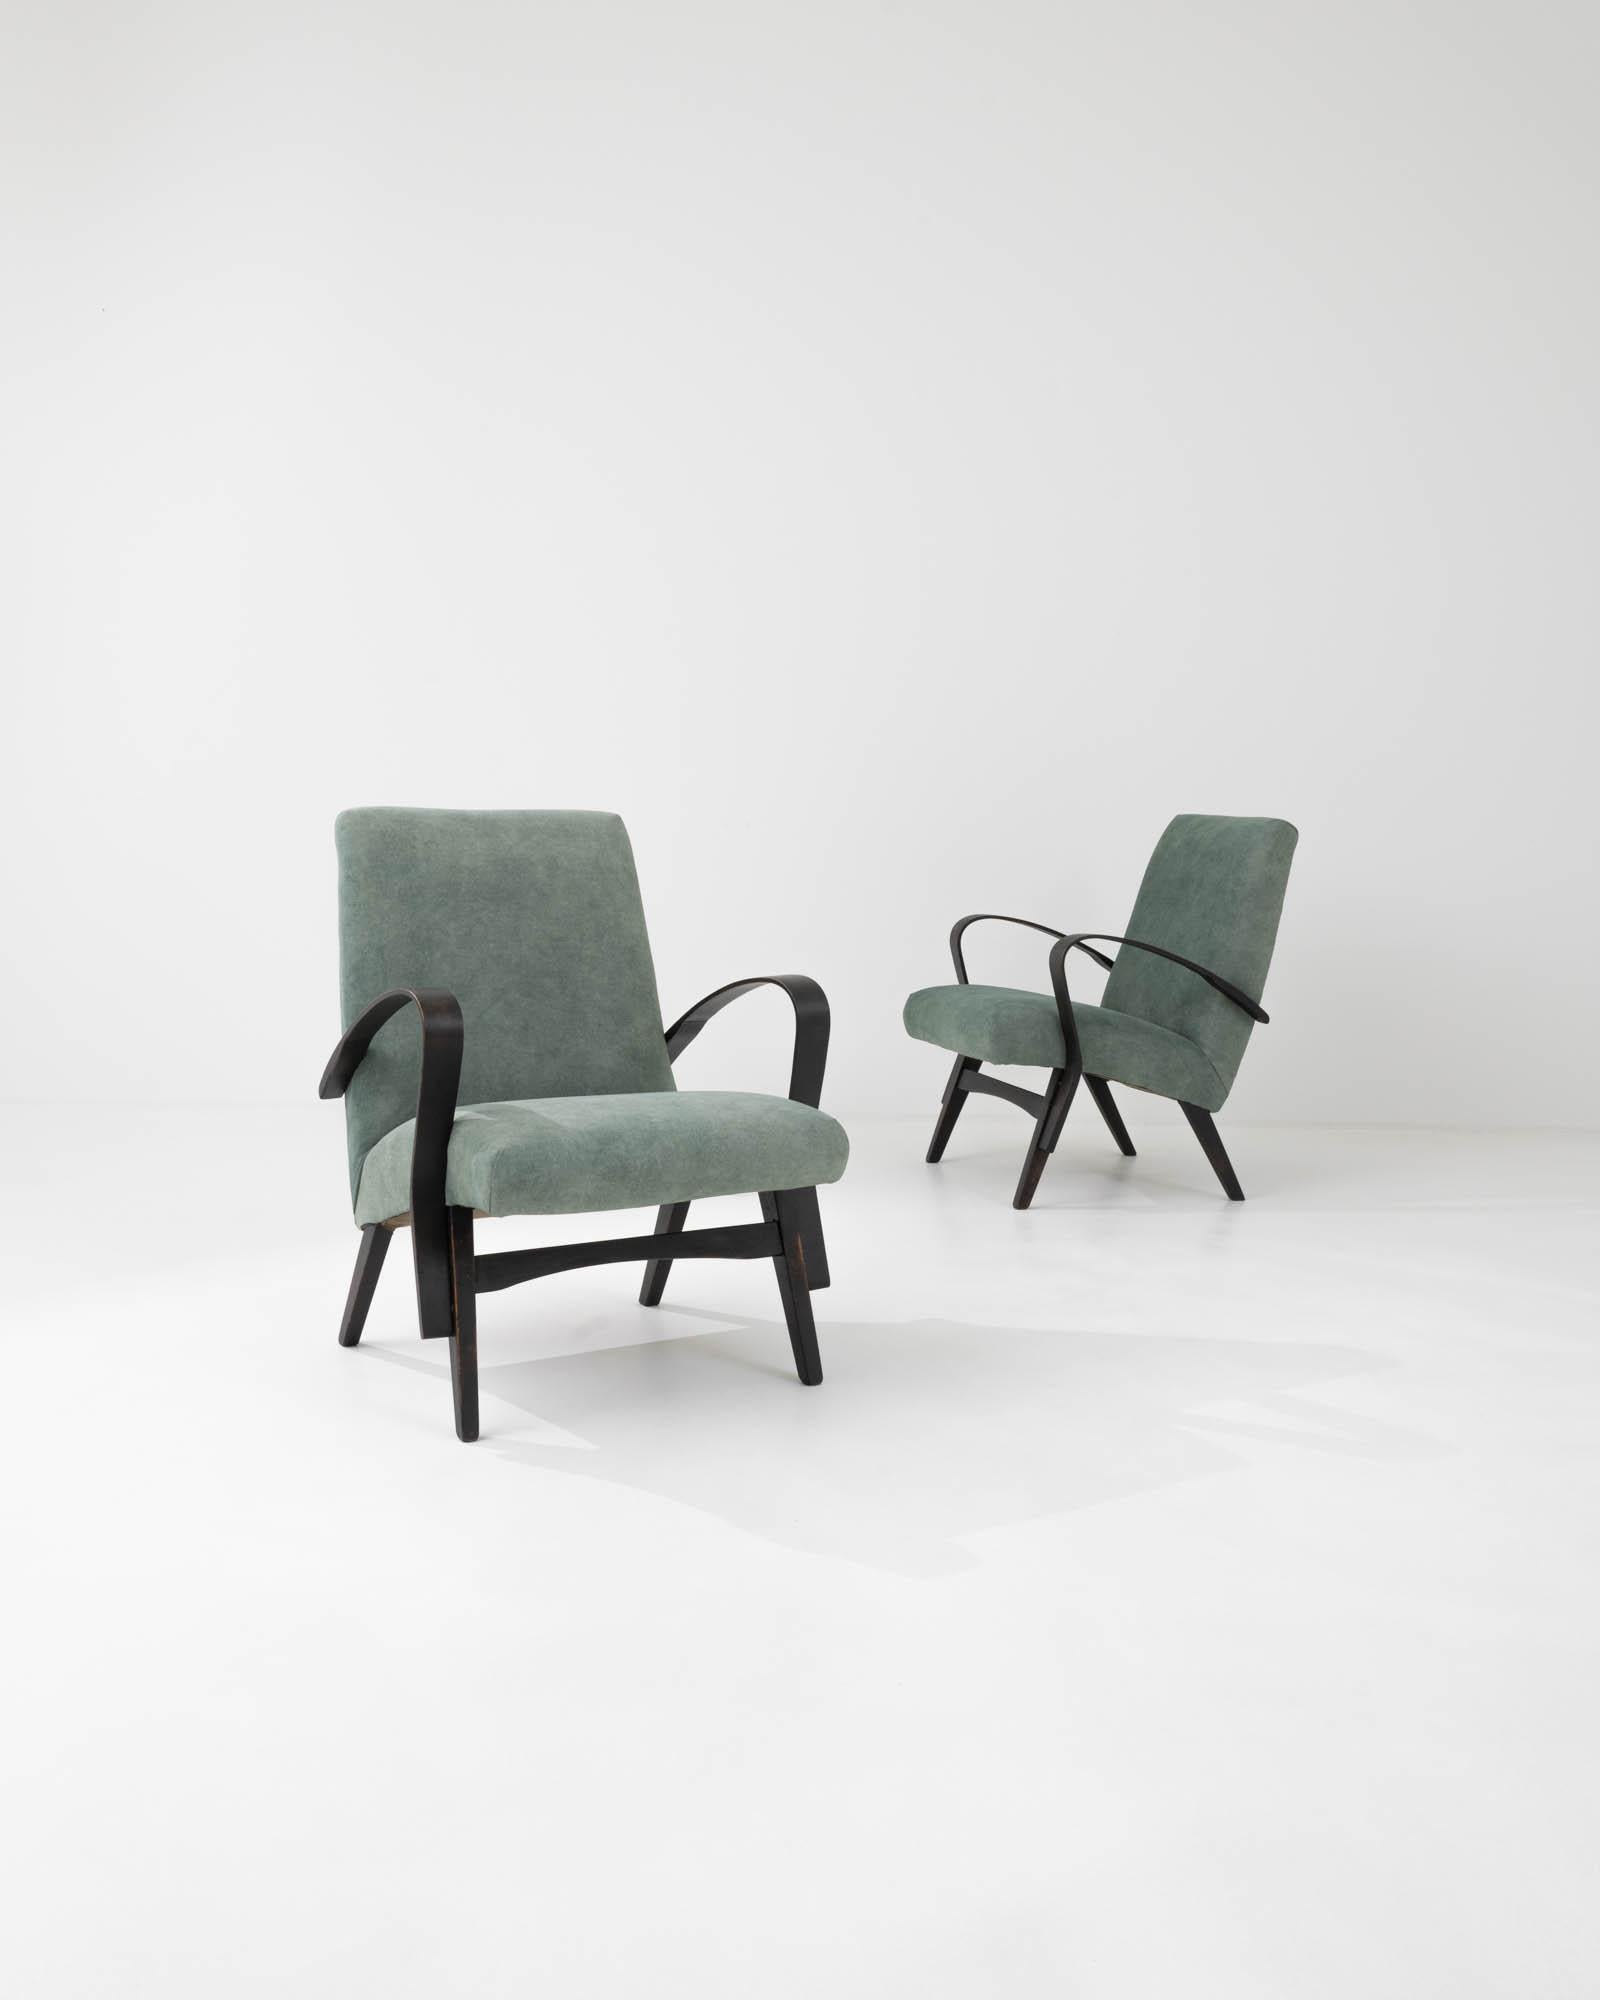 A pair of upholstered armchairs by Czech furniture manufacturer Tatra. Characterized by the clean lines that define their minimalist silhouette, these armchairs were crafted by the iconic Czech brand Tatra, and attributed to designer František Jirák